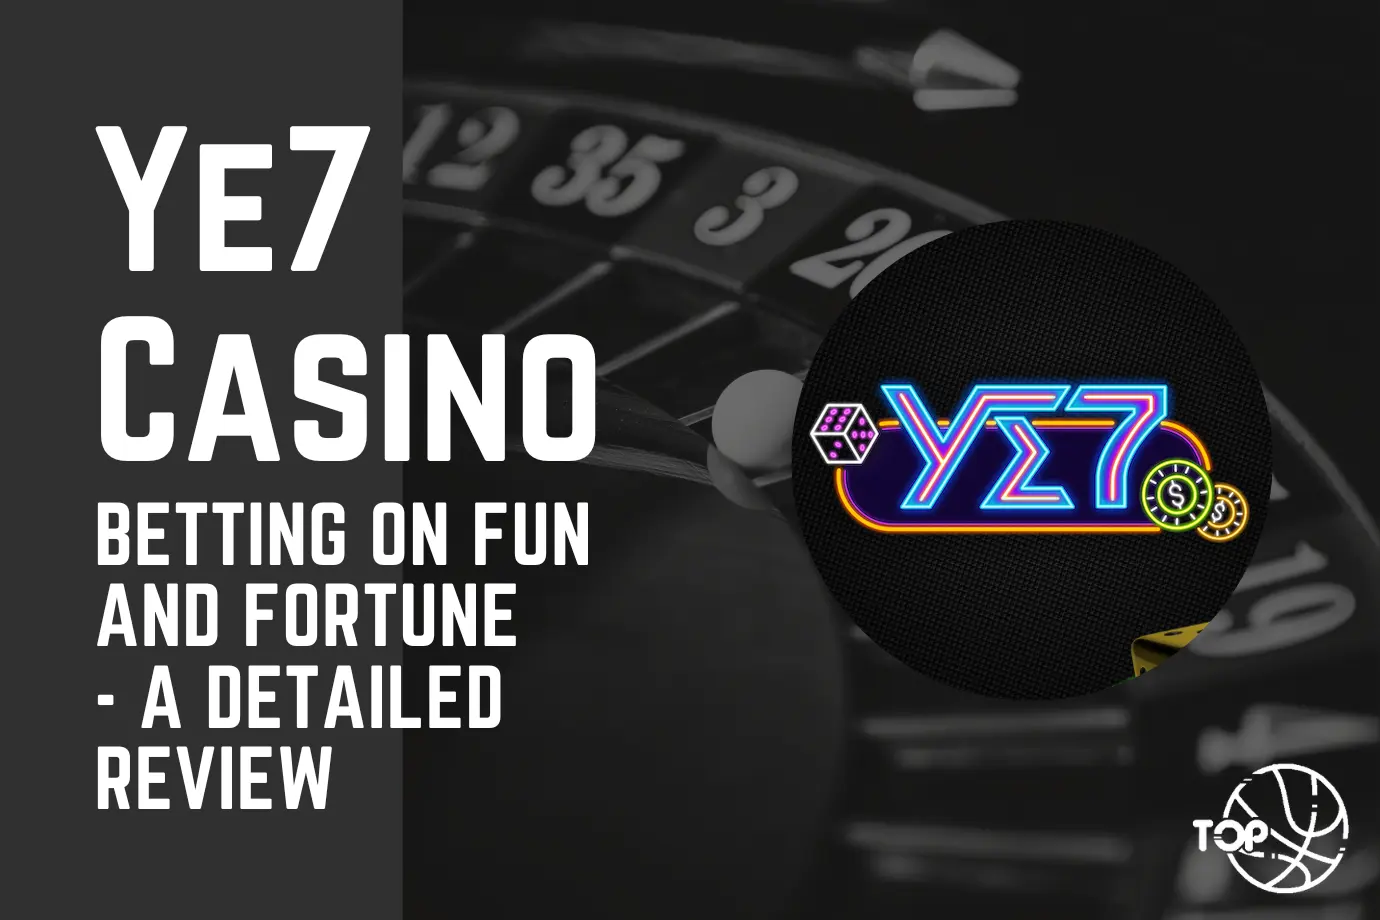 Ye7 Casino Betting on Fun and Fortune - A Detailed Review